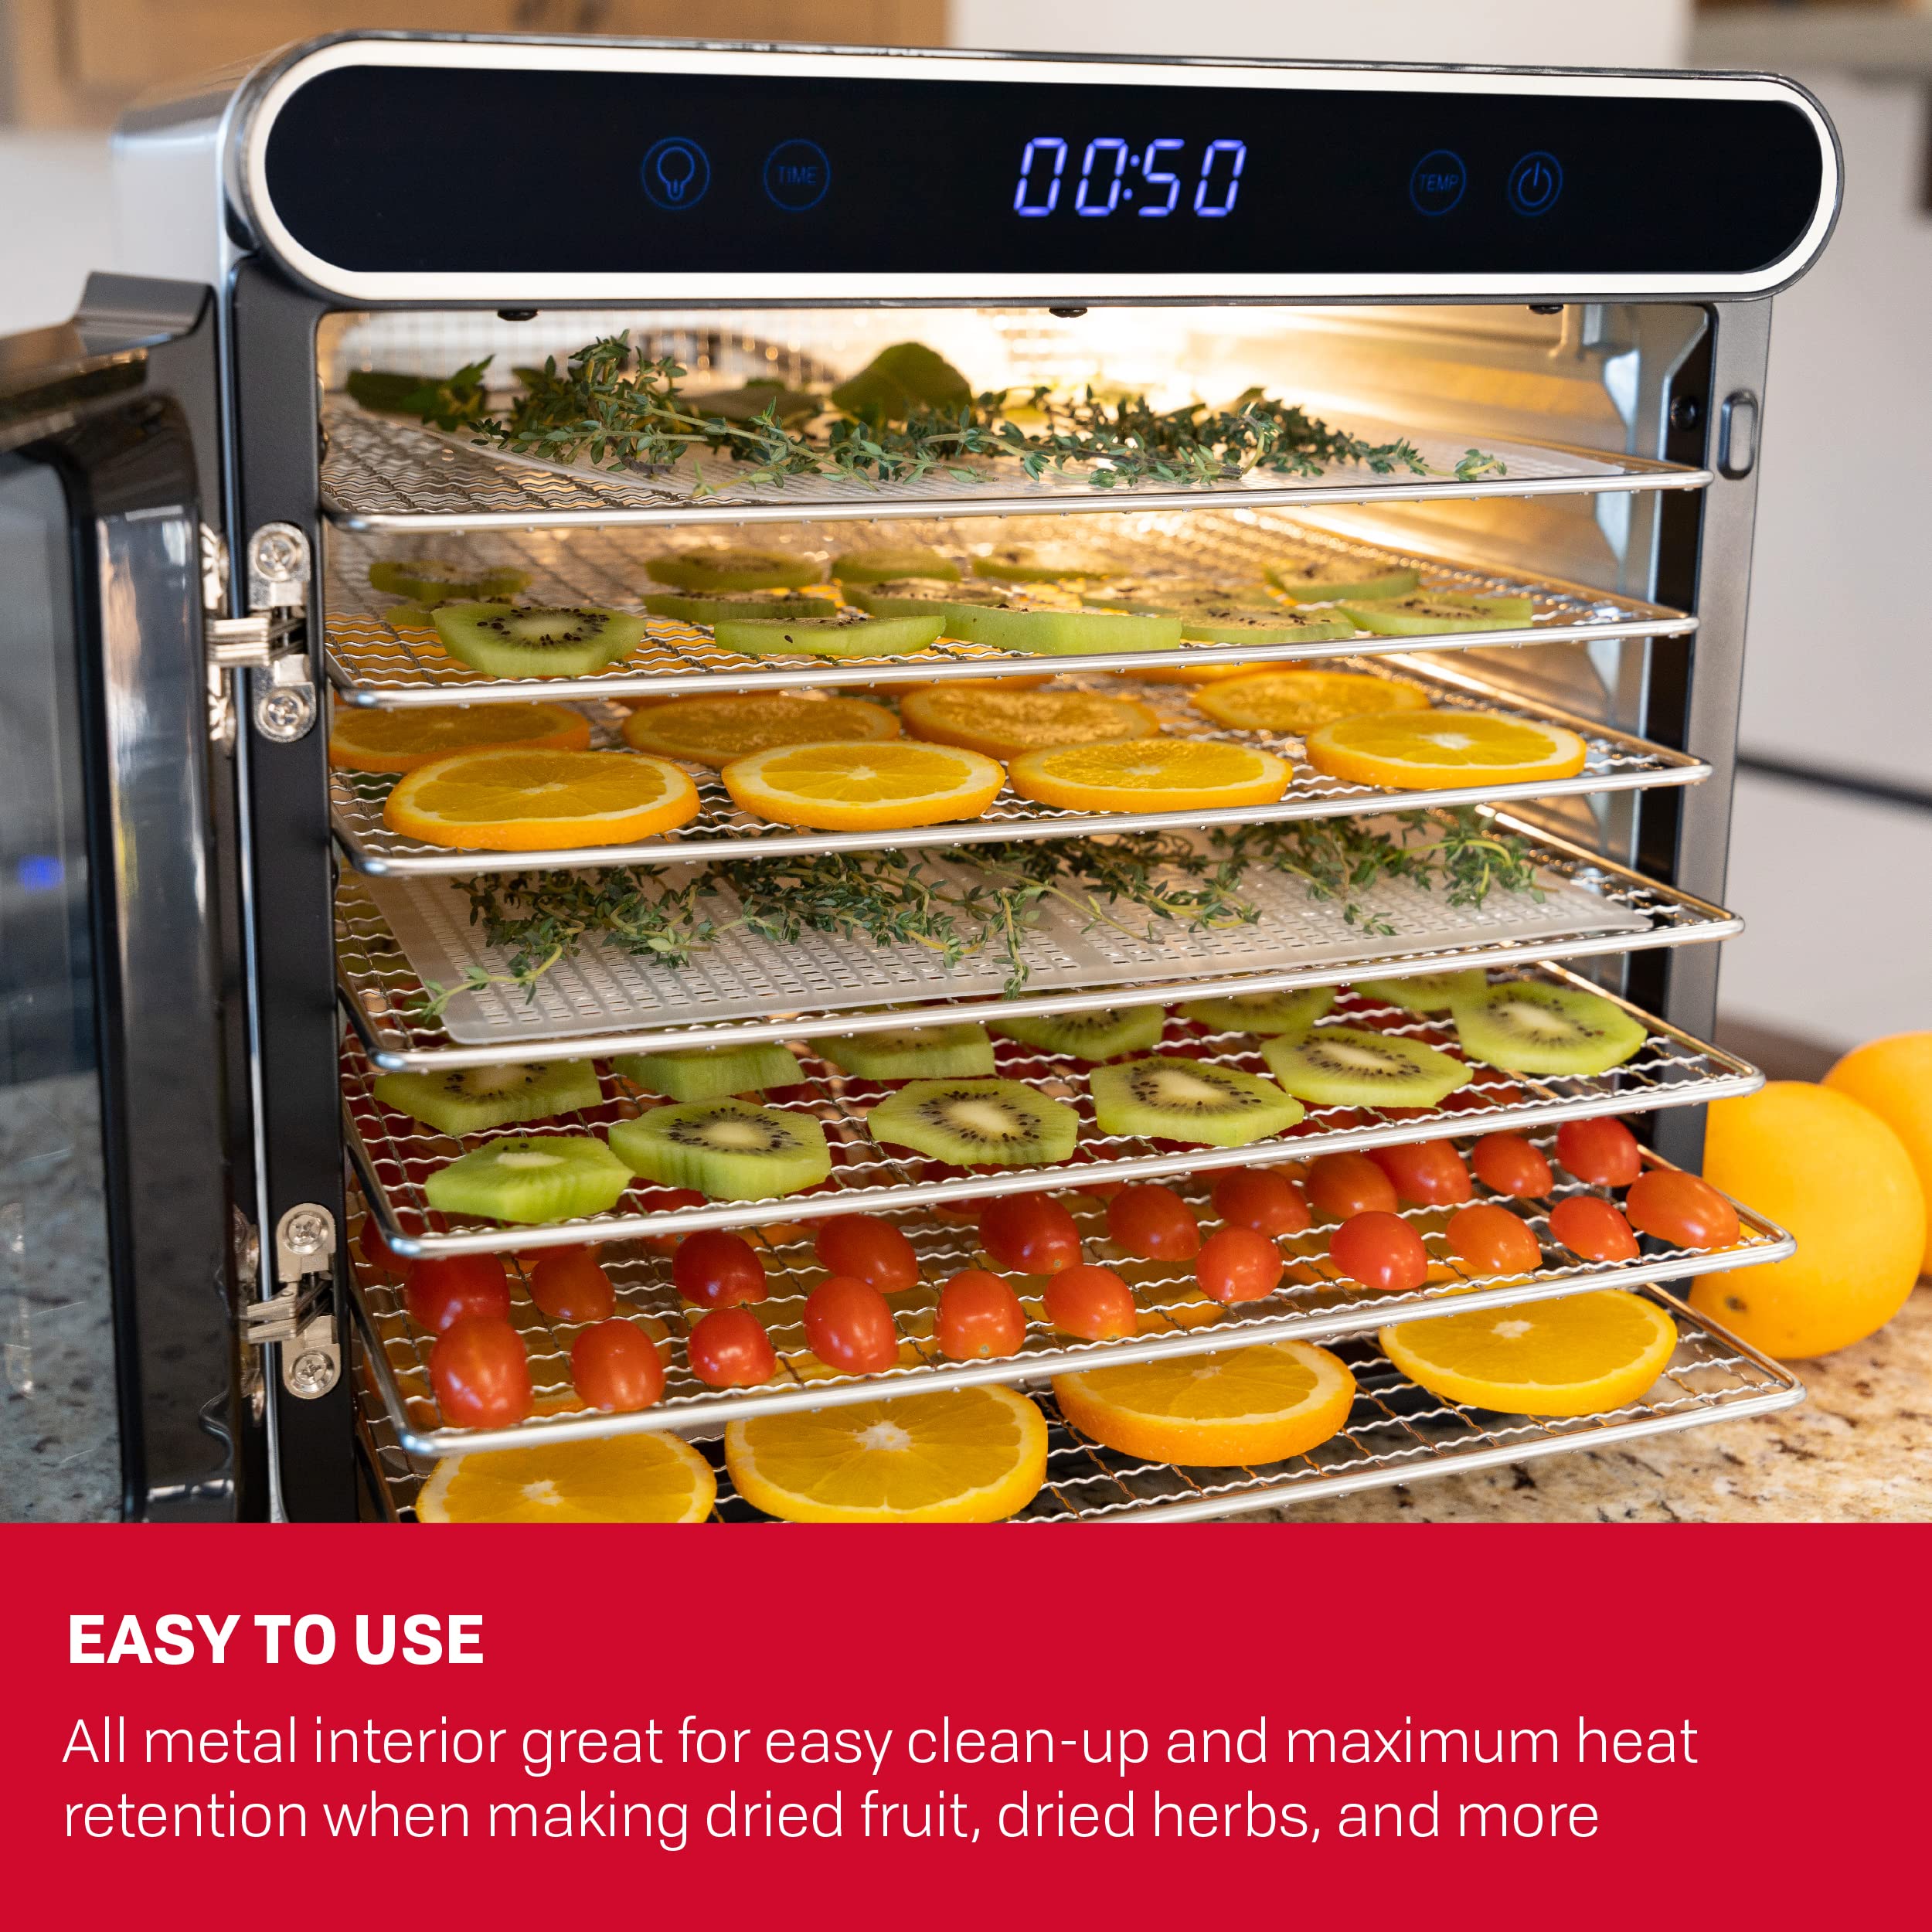 NESCO FD-7SSD Digital Food Dehydrator for Beef Jerky, Dried Fruit and Dog Treats, 7 Stainless Steel Trays, Silver